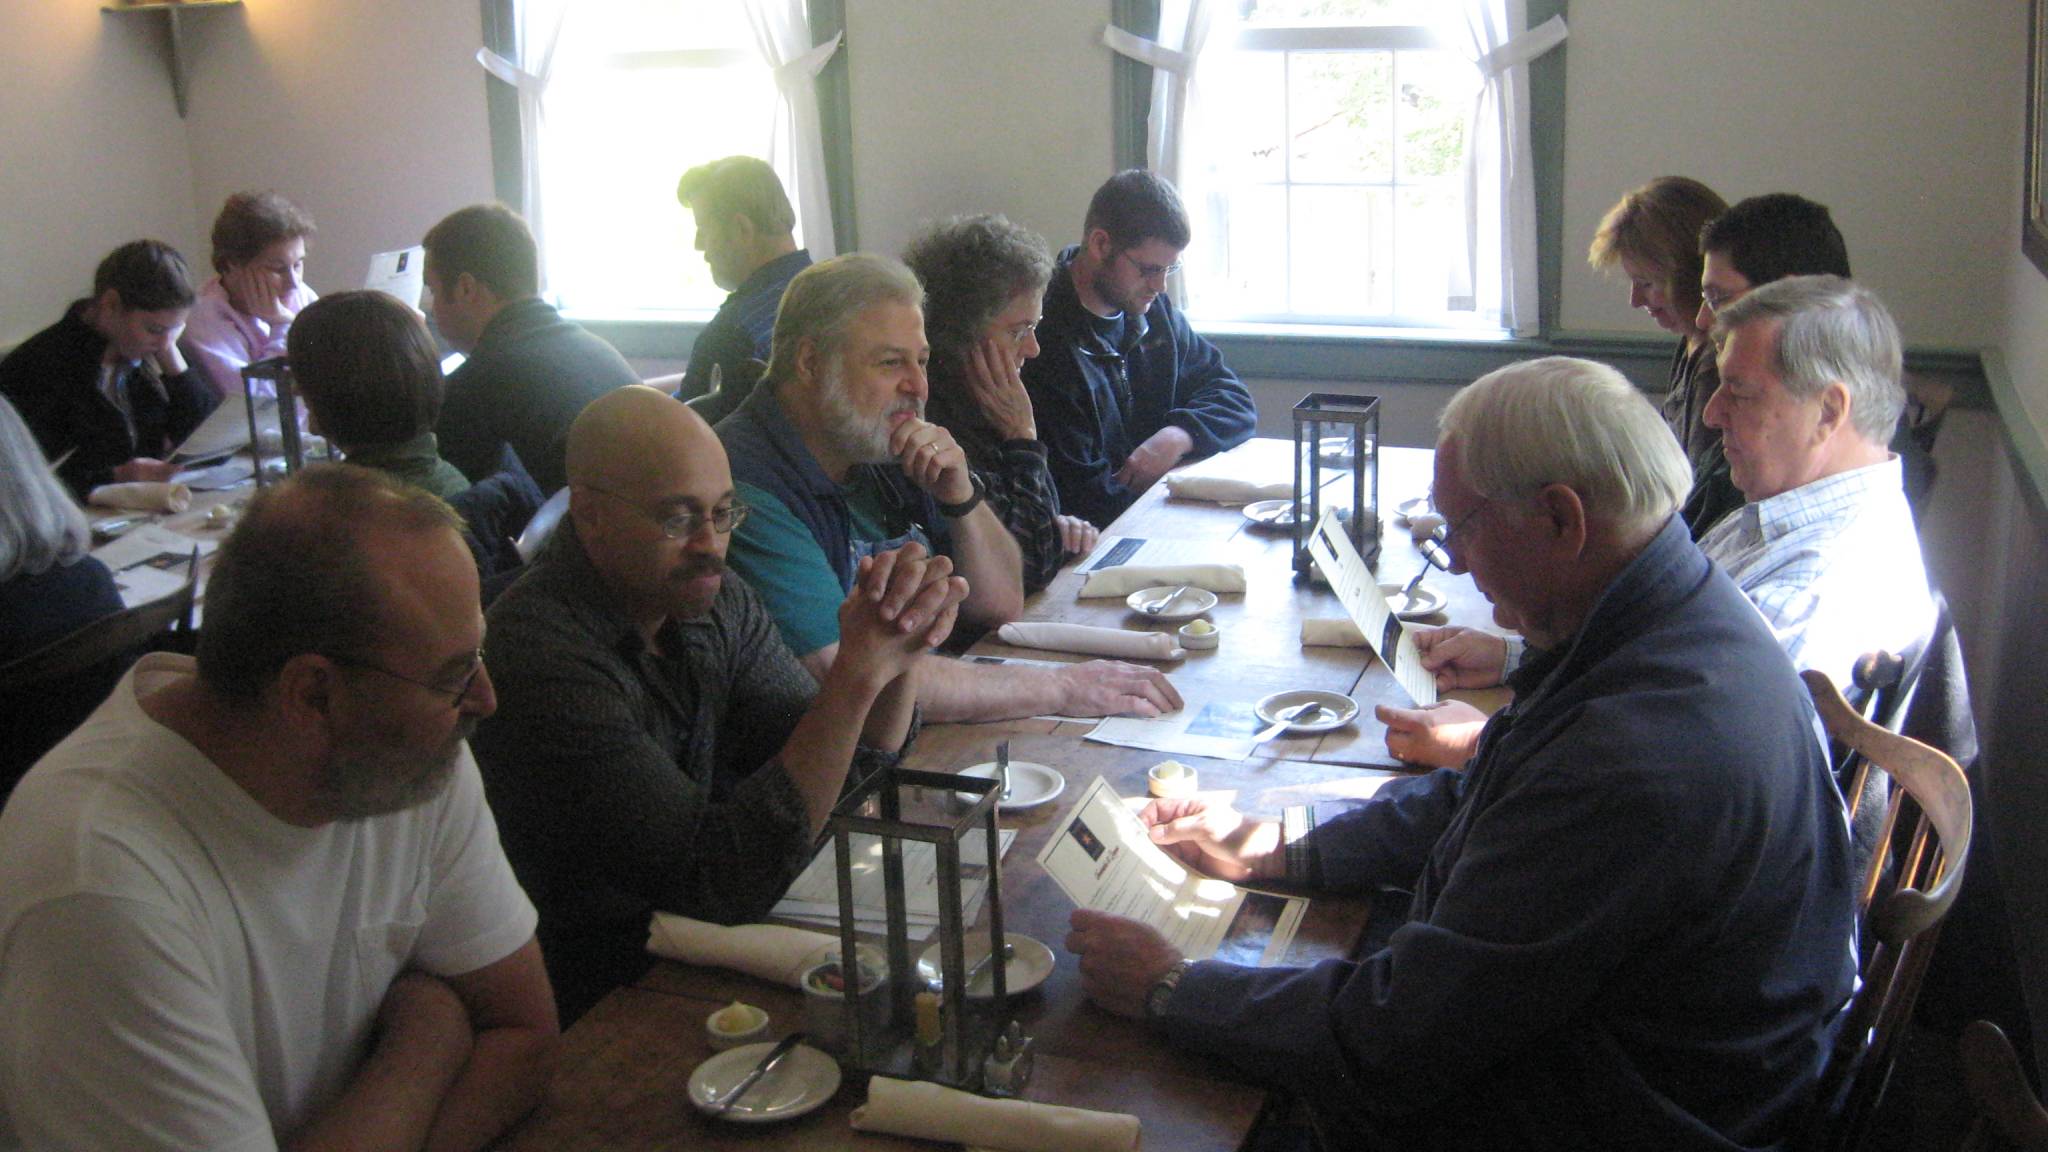 Greensboro Lunch Bunch at Old Salem / MESDA 2012